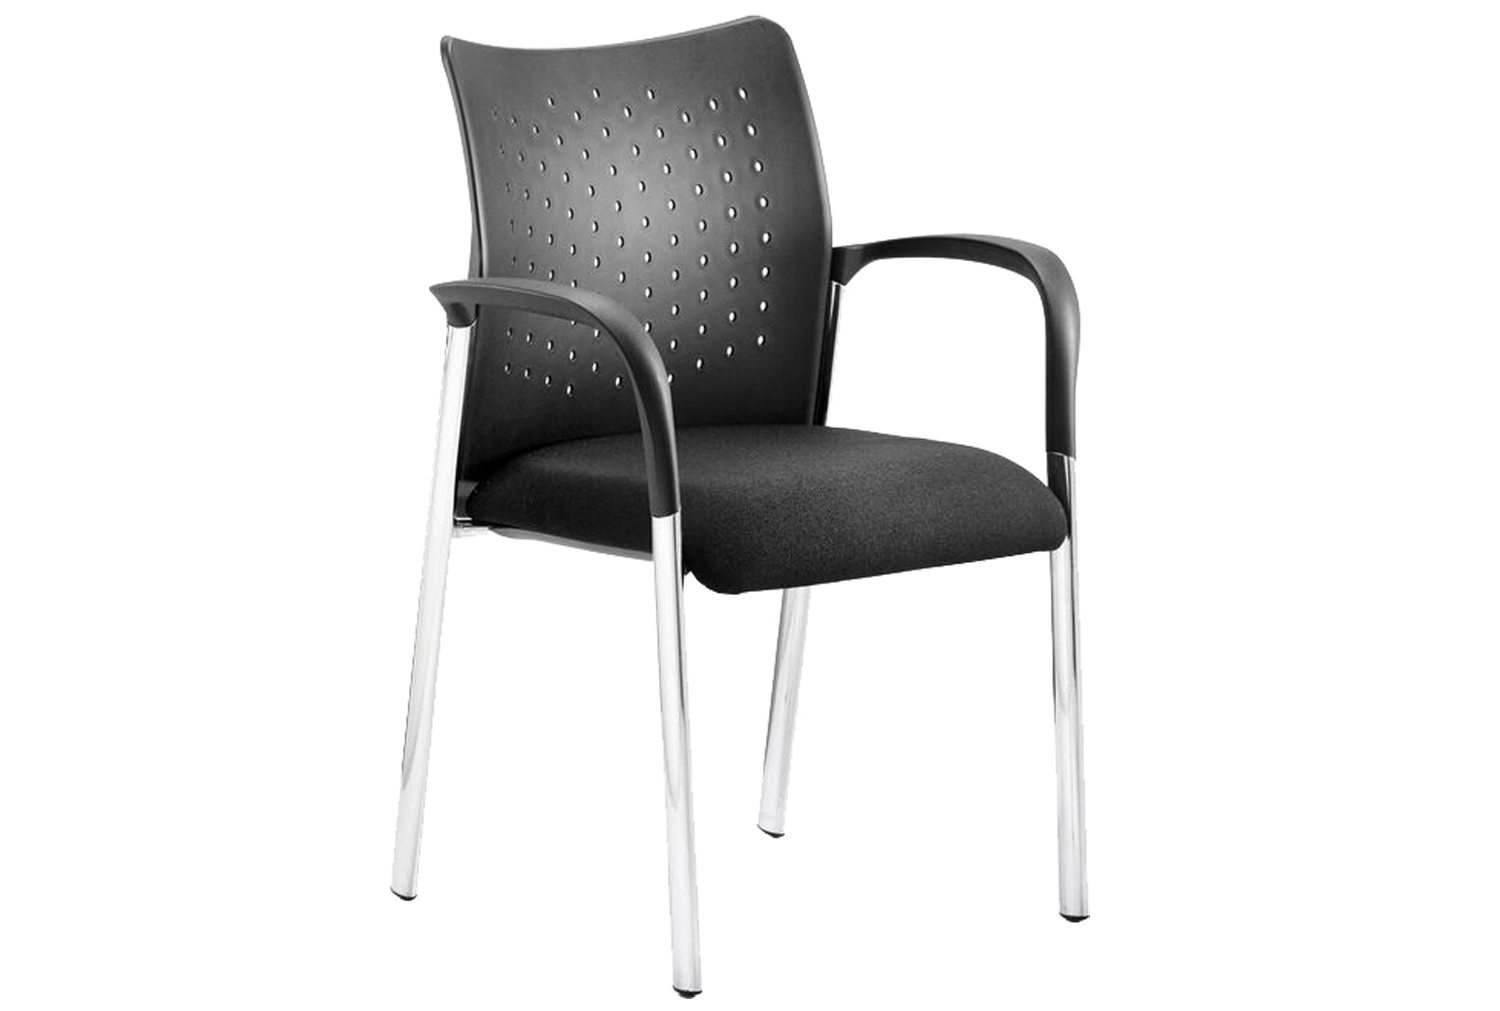 Guild 4 Leg Office ArmOffice Chair With Nylon Back, Black, Express Delivery